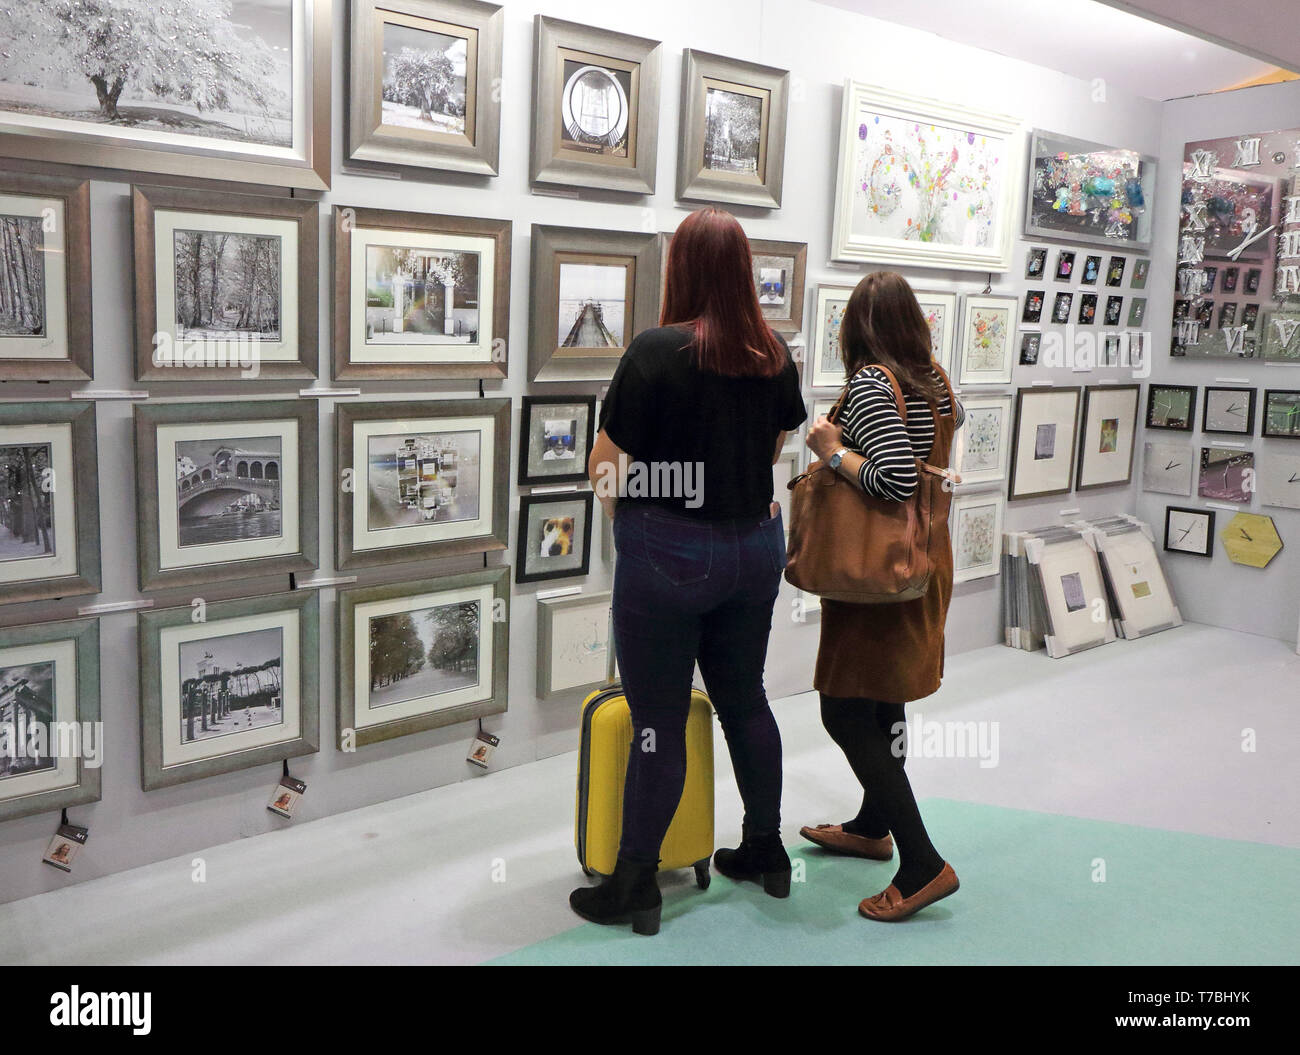 London, UK. 5th May, 2019. Visitors seen viewing the bespoke artwork on display during the exhibition.Grand Designs Live exhibition sponsored by Anglian Home Improvements, with more than 500 exhibitors in zones for sustainable technology, self-build, design, grand technology, interiors, kitchens & bathrooms, gardens, food & housewares. The show offers visitors a unique opportunity to see all the latest trends for the home as well as many products never seen before. Based on the Channel 4 TV series and held at Excel London. Credit: Keith Mayhew/SOPA Images/ZUMA Wire/Alamy Live News Stock Photo